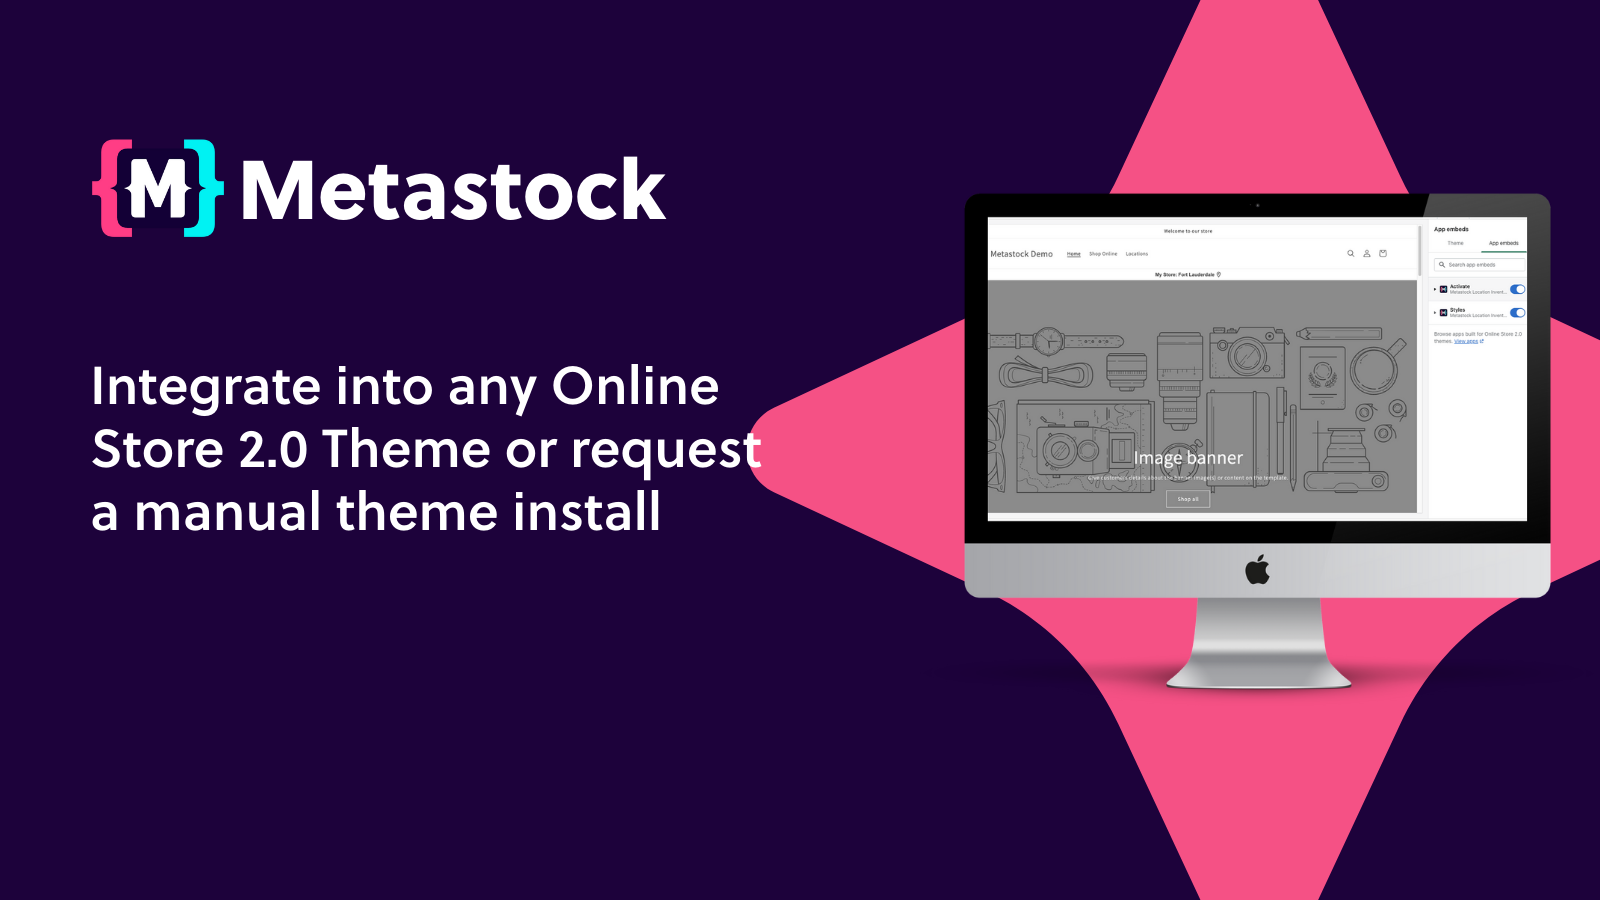 Integrate into any Online Store 2.0 theme or request an install